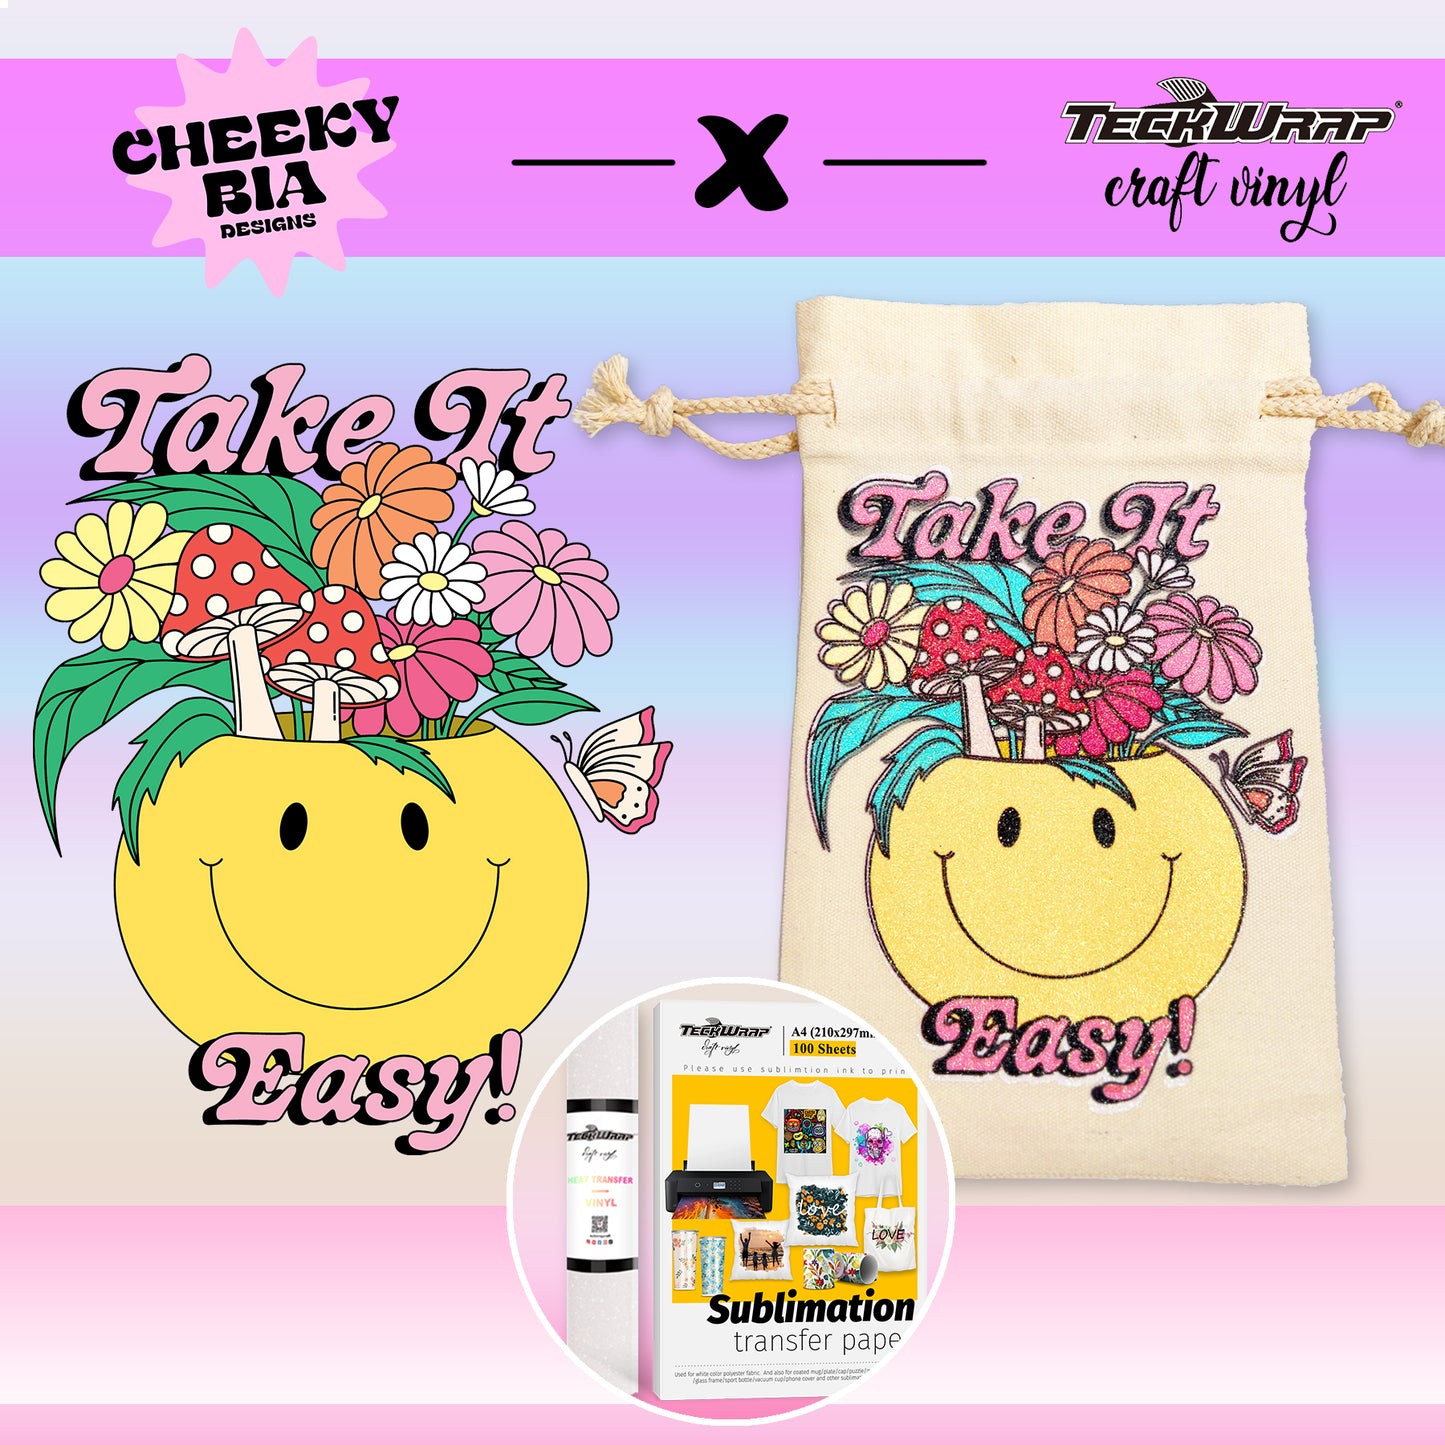 CheekyBia X TeckWrapCraft Smiley Vase Glitter HTV & Sublimation Paper Bundle (SVG Excluded)